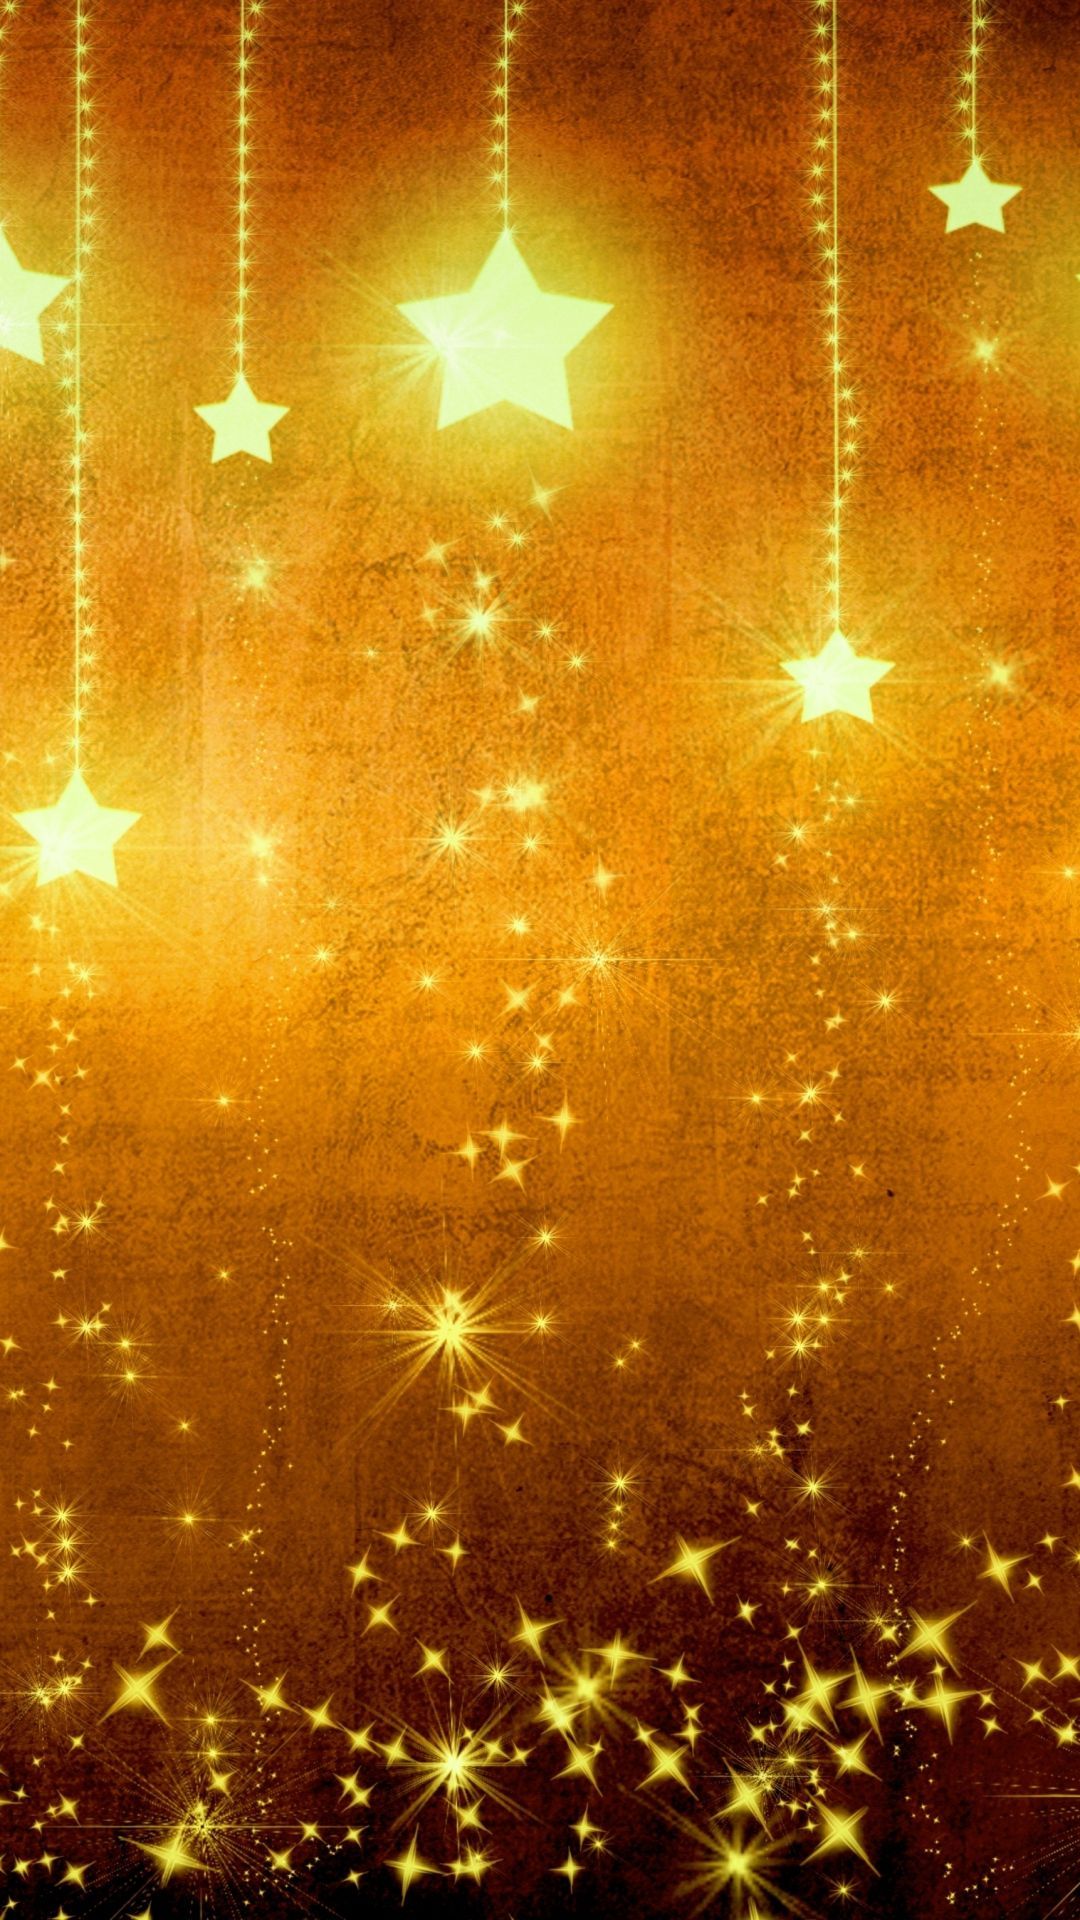 Star Gold Holiday Background Brown Yellow Light Texture iPhone 6 Wallpaper Download. iPhone Wallpape. Holiday background, Wallpaper iphone summer, Gold wallpaper